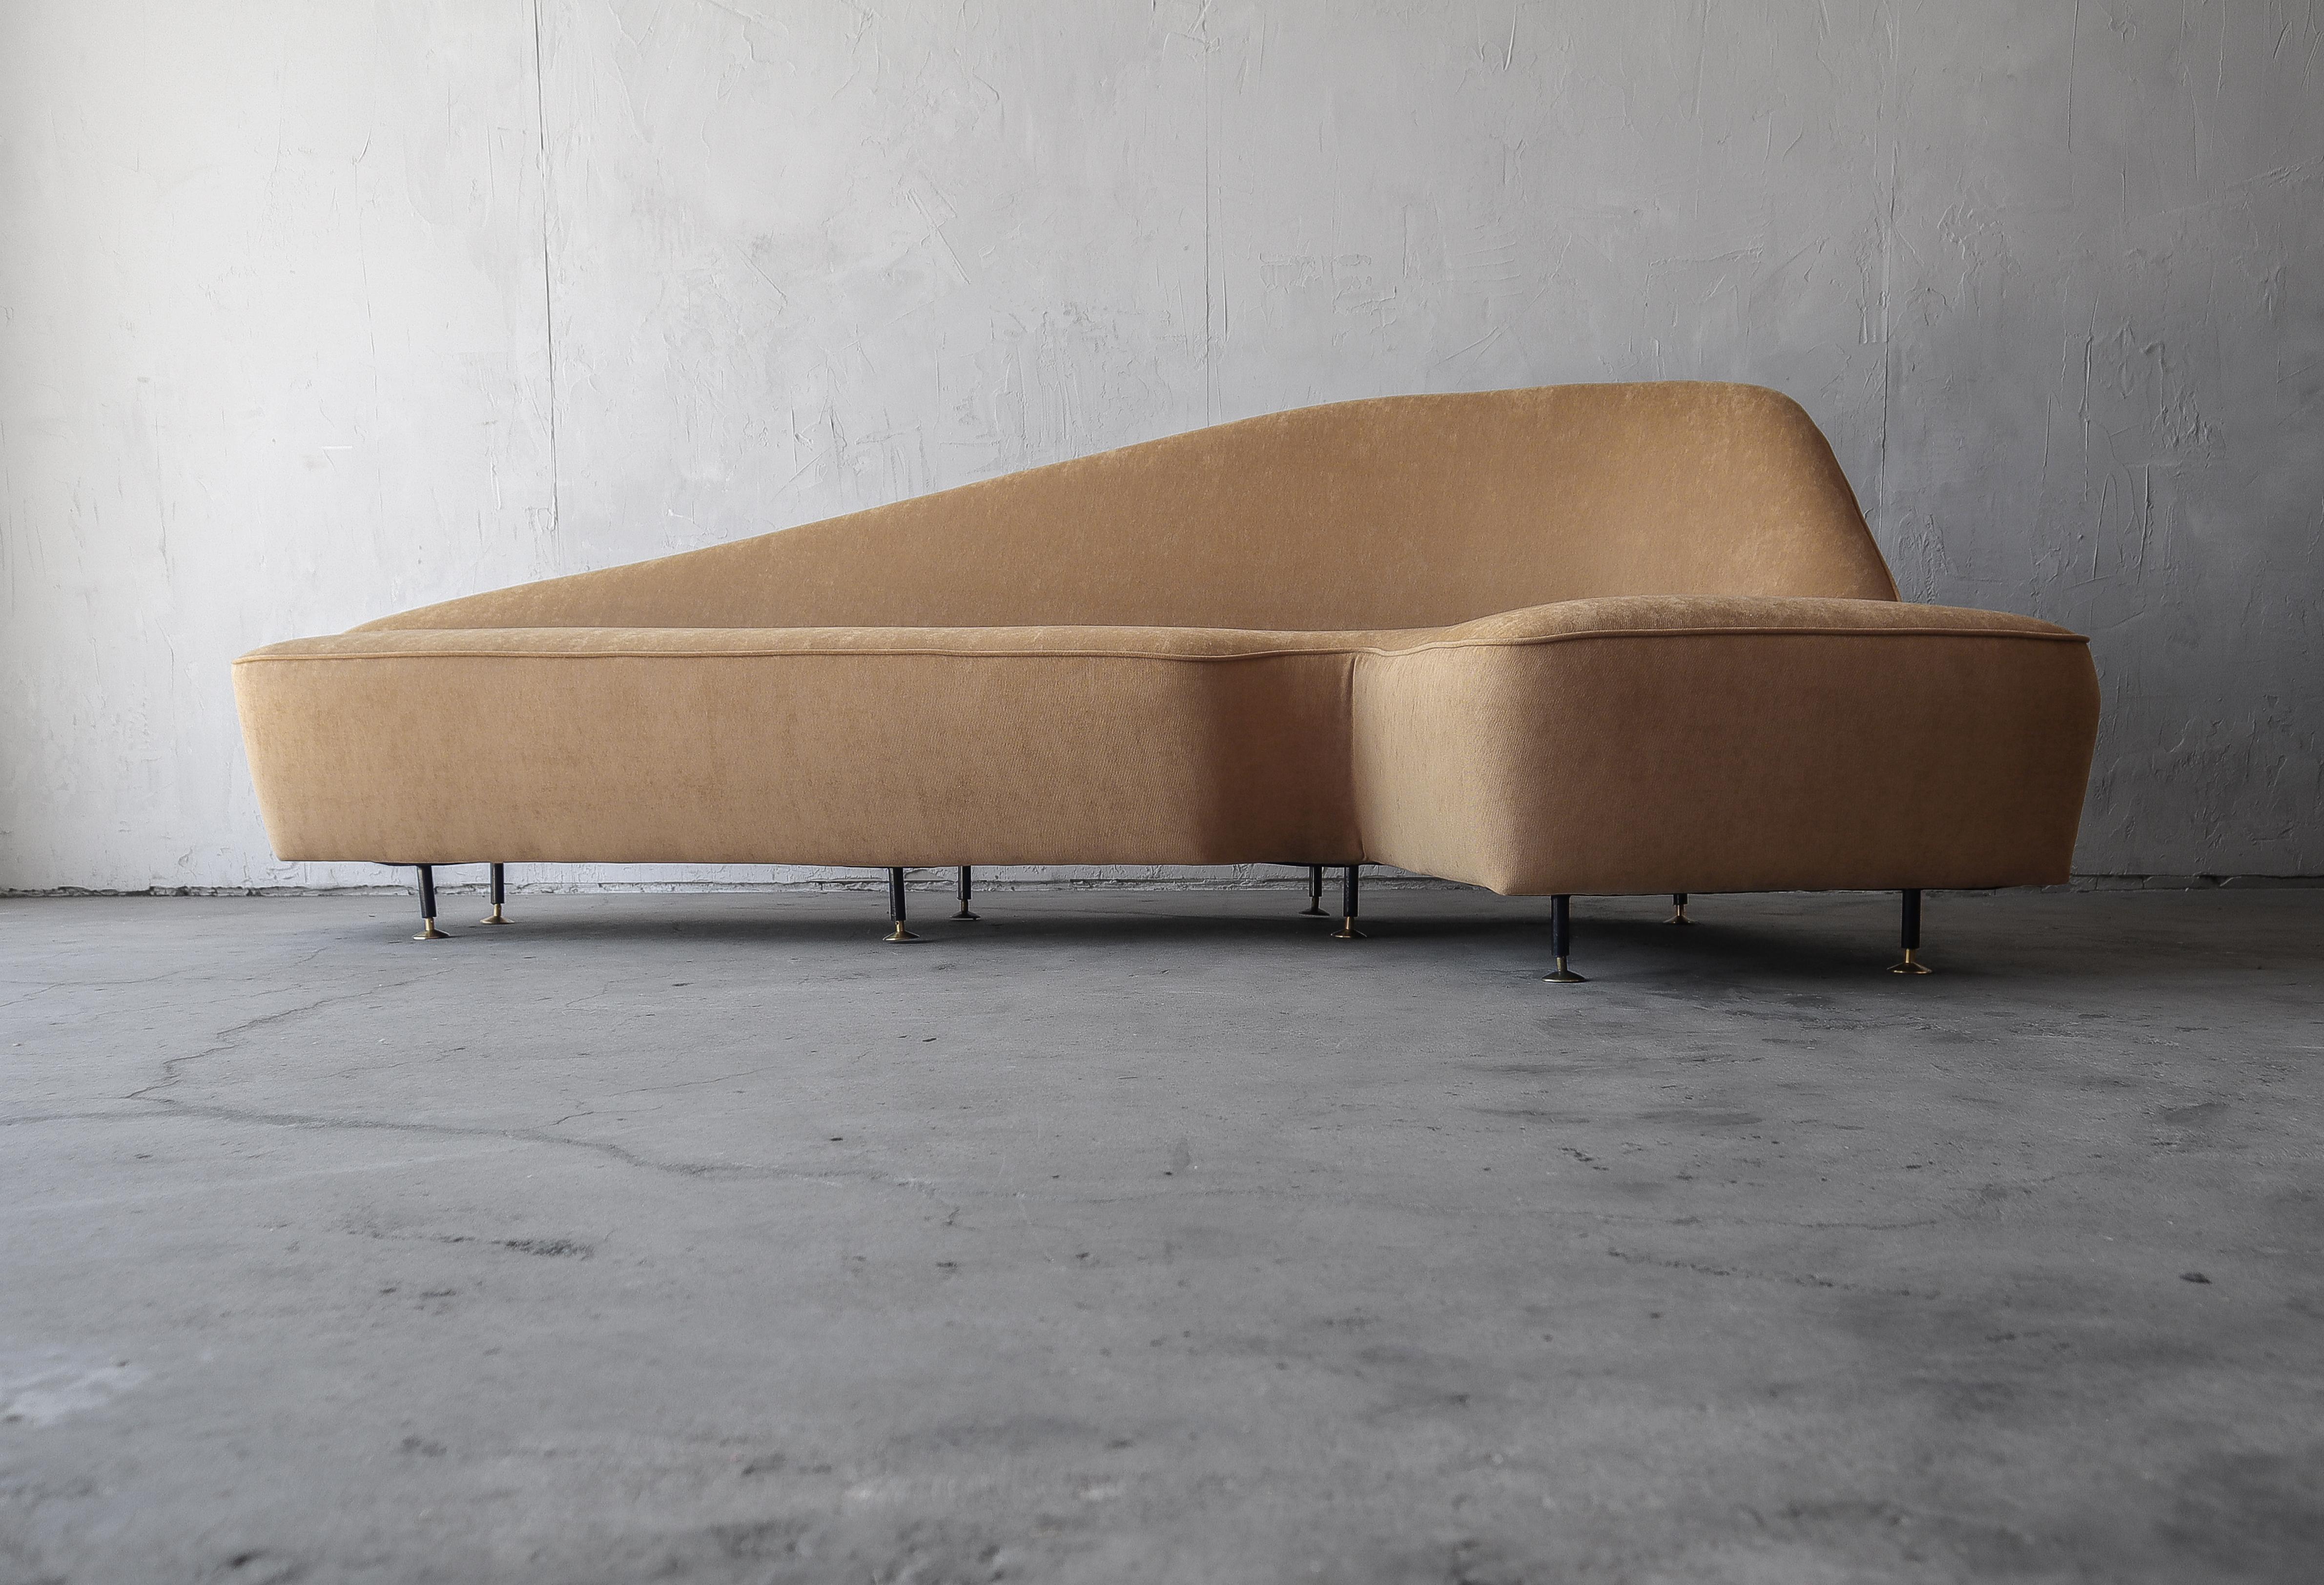 If elegance was a sofa, this would be the one.  This 1950's Italian sofa has all the right angles and curves in all the right places.

Check out the before and during restoration pictures.  This sofa has a completely steel frame, you rarely see this